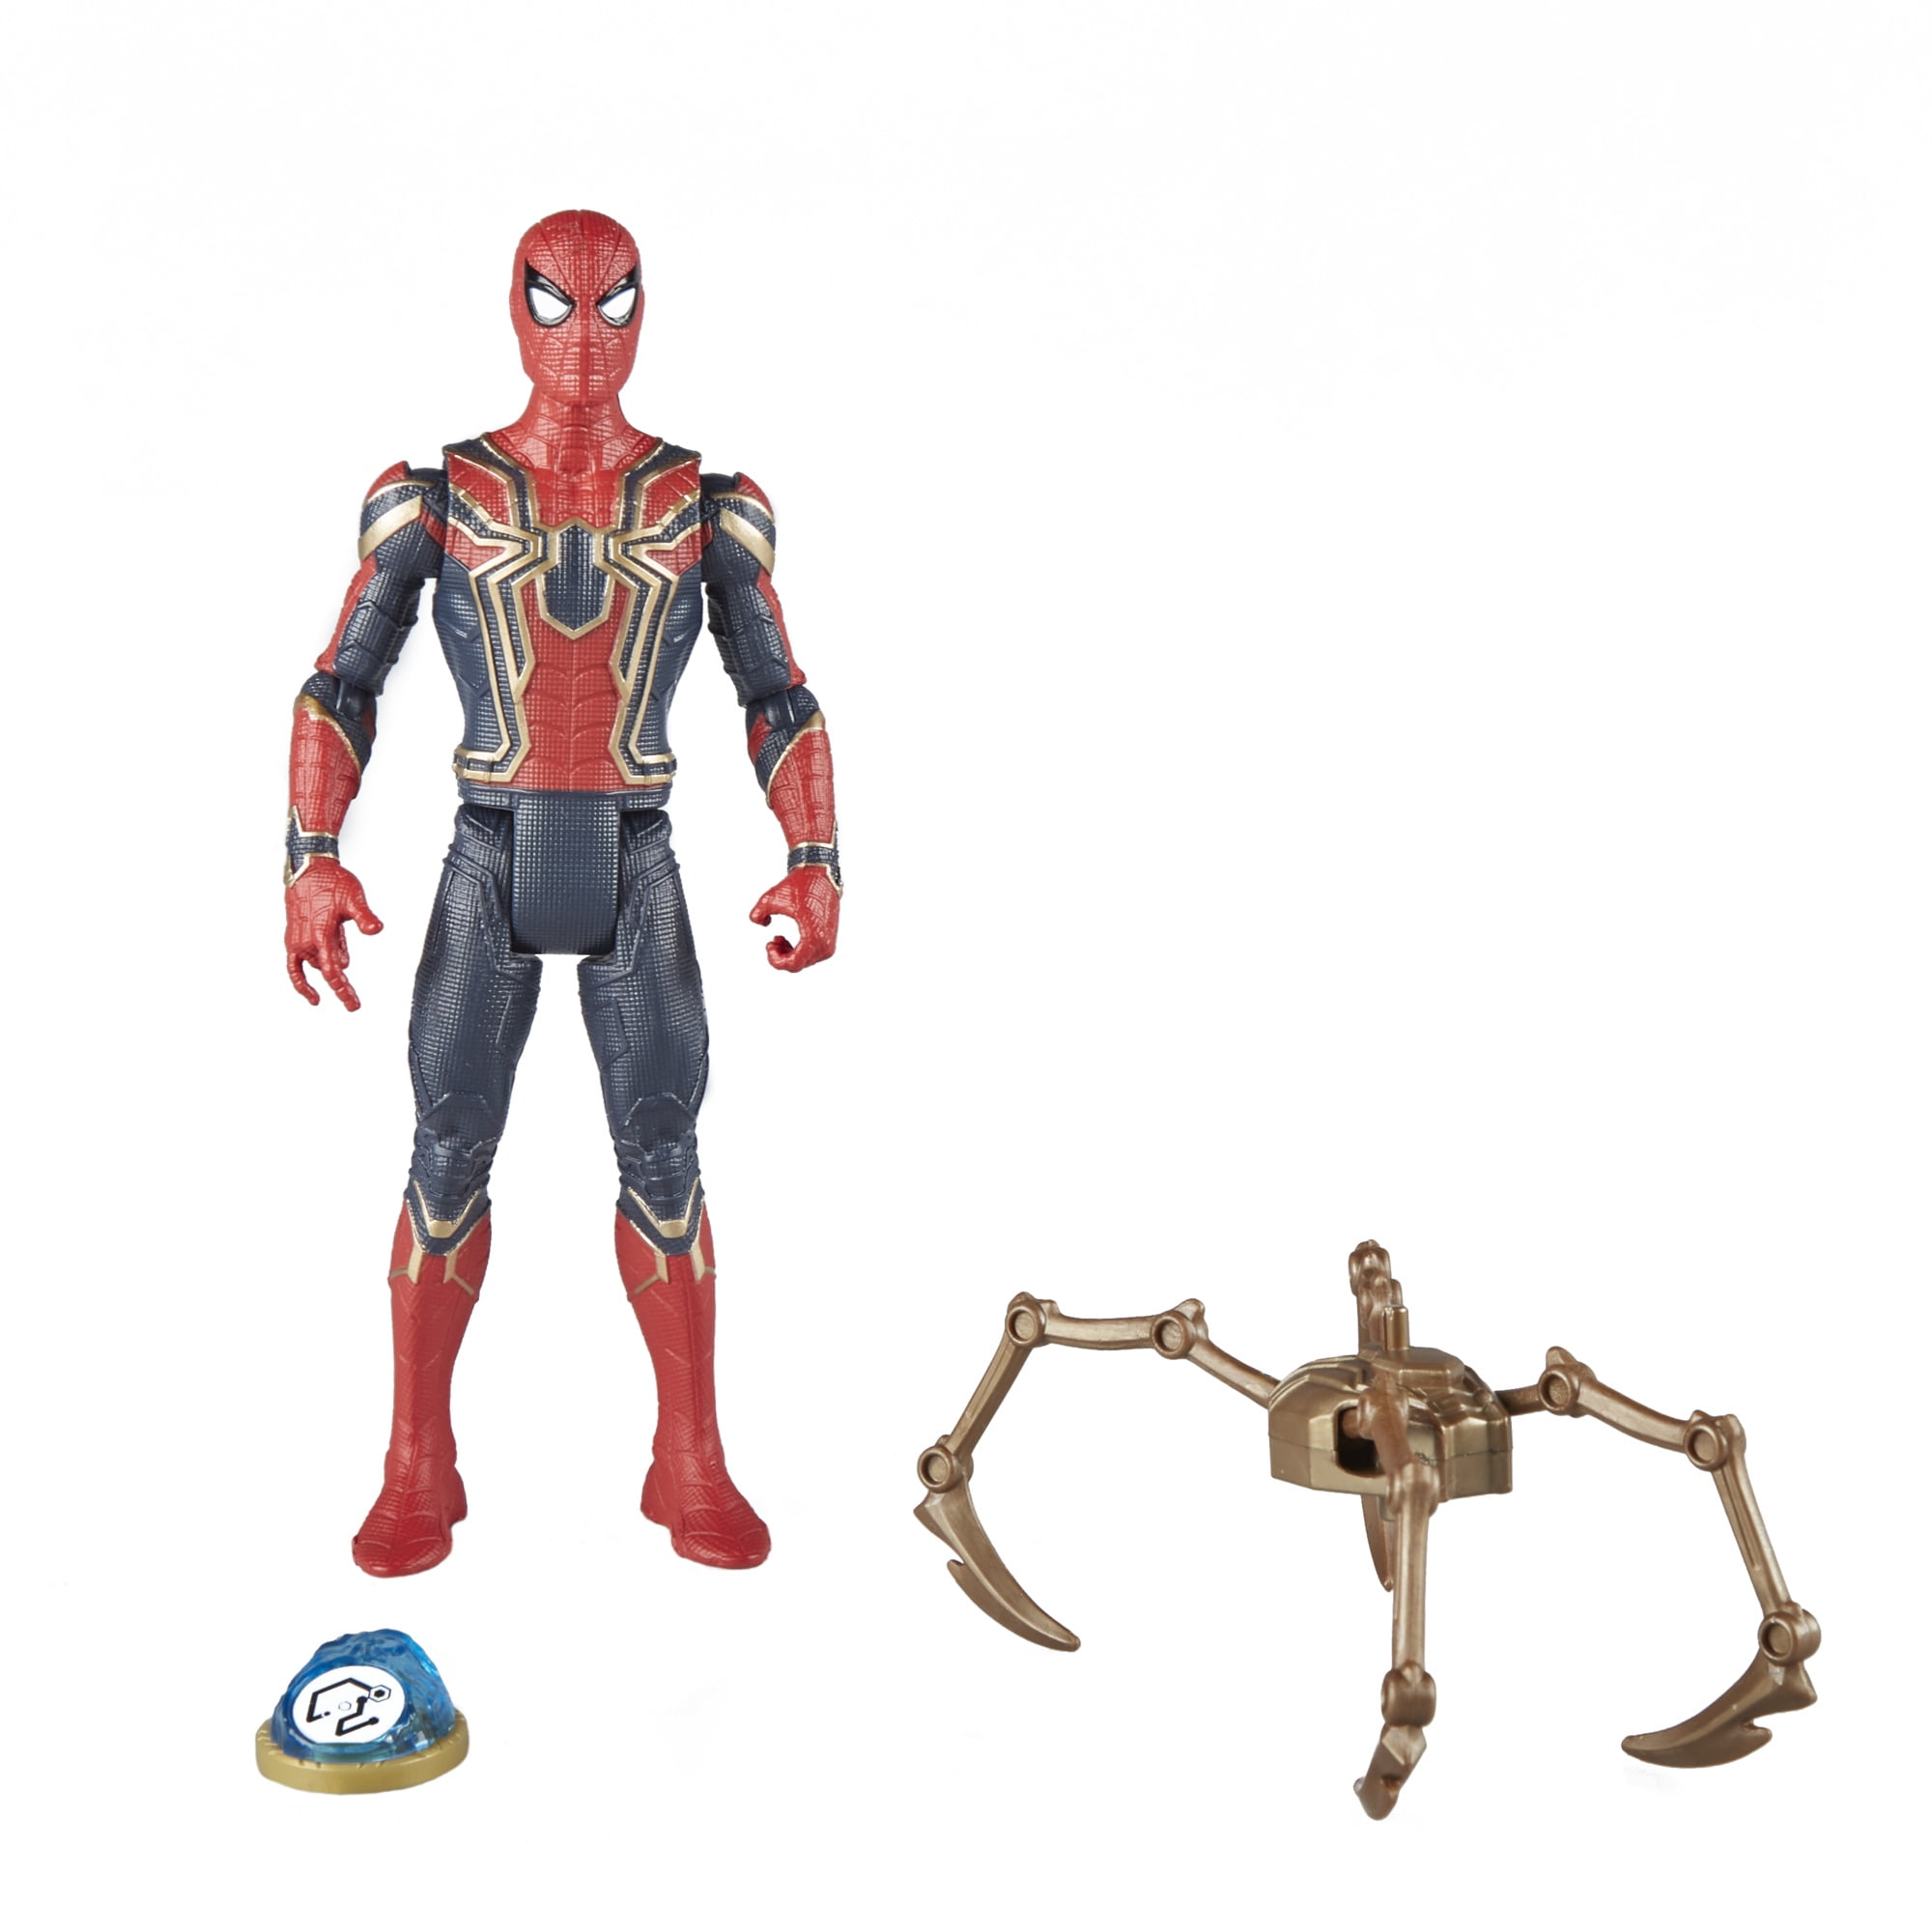 Marvel Spider Man Iron Spiderman Avengers Infinity War 7 inch Action Figure Toy 